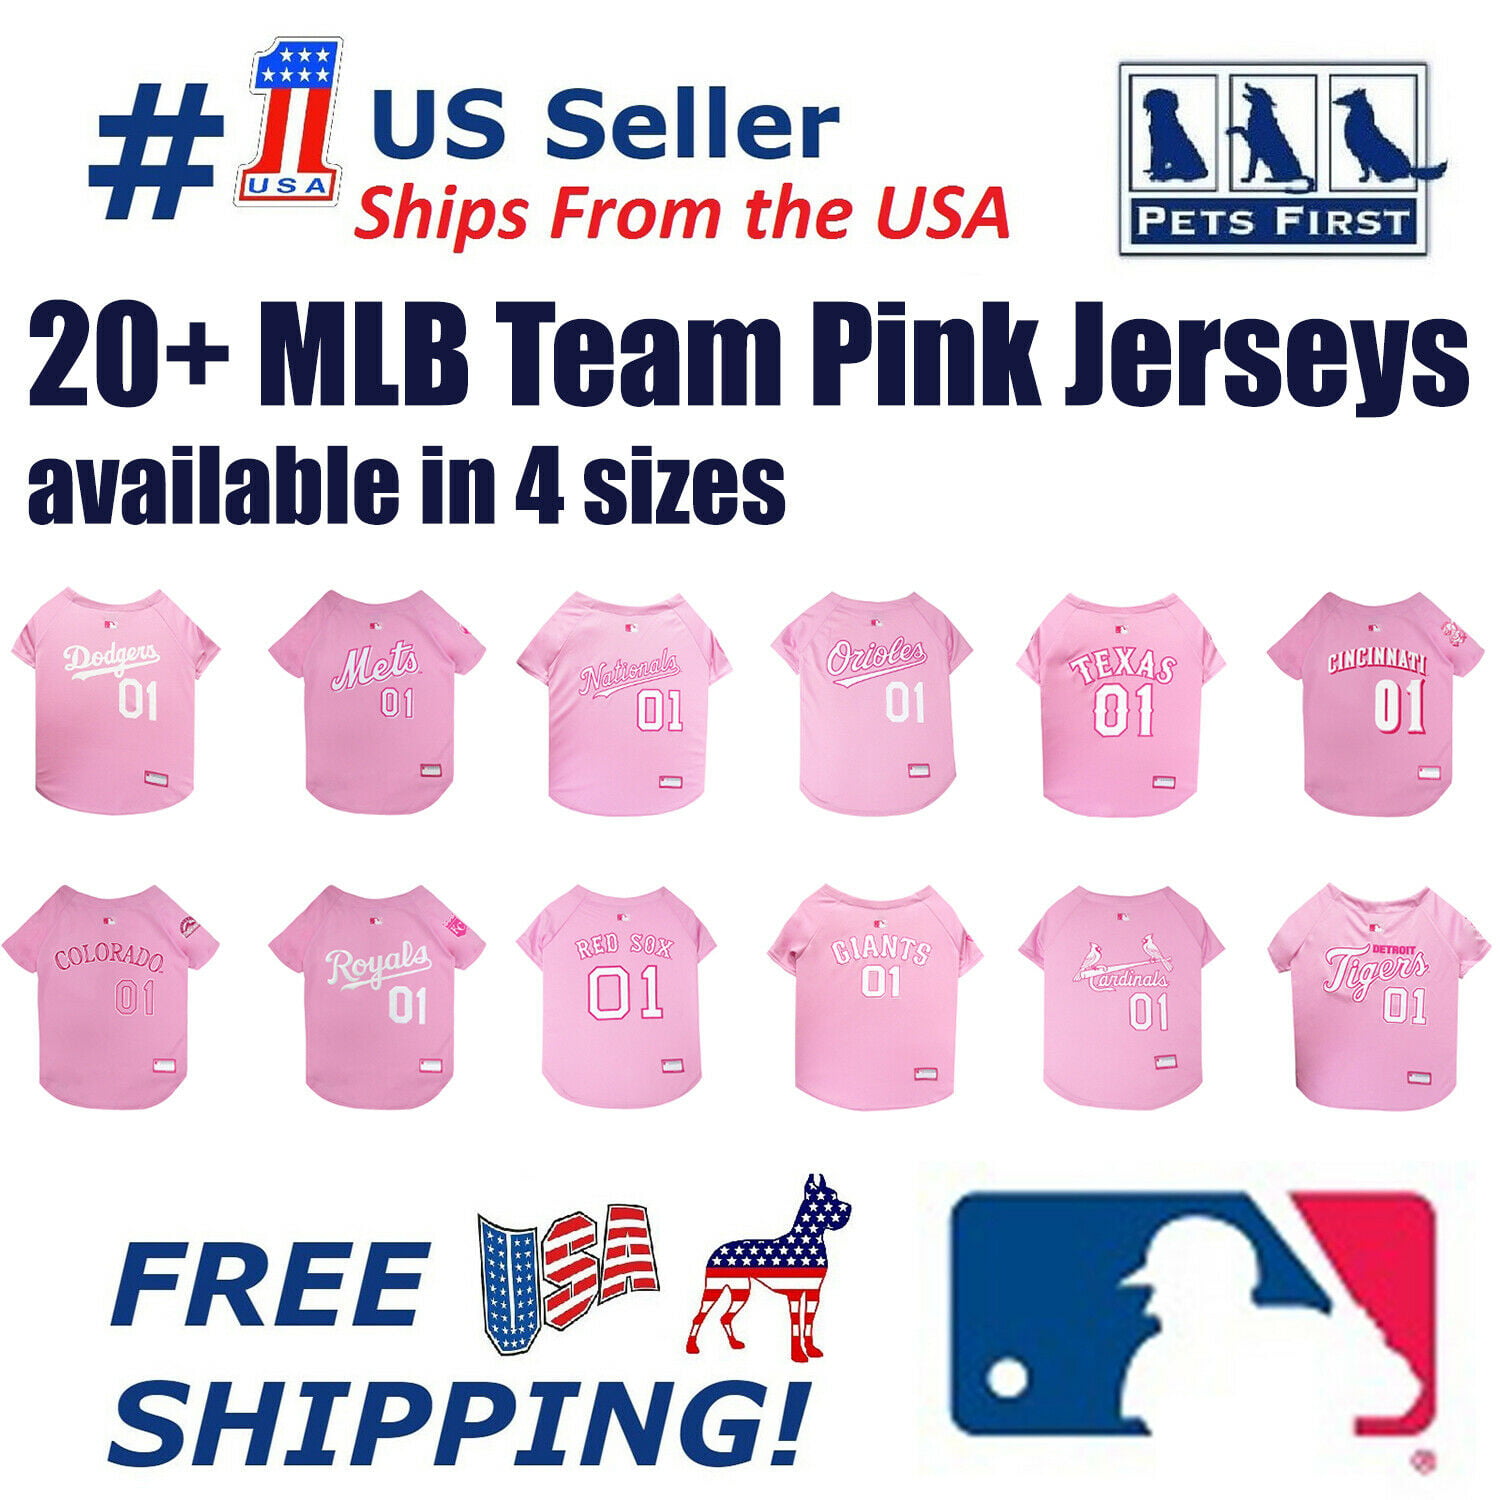 pink orioles jersey